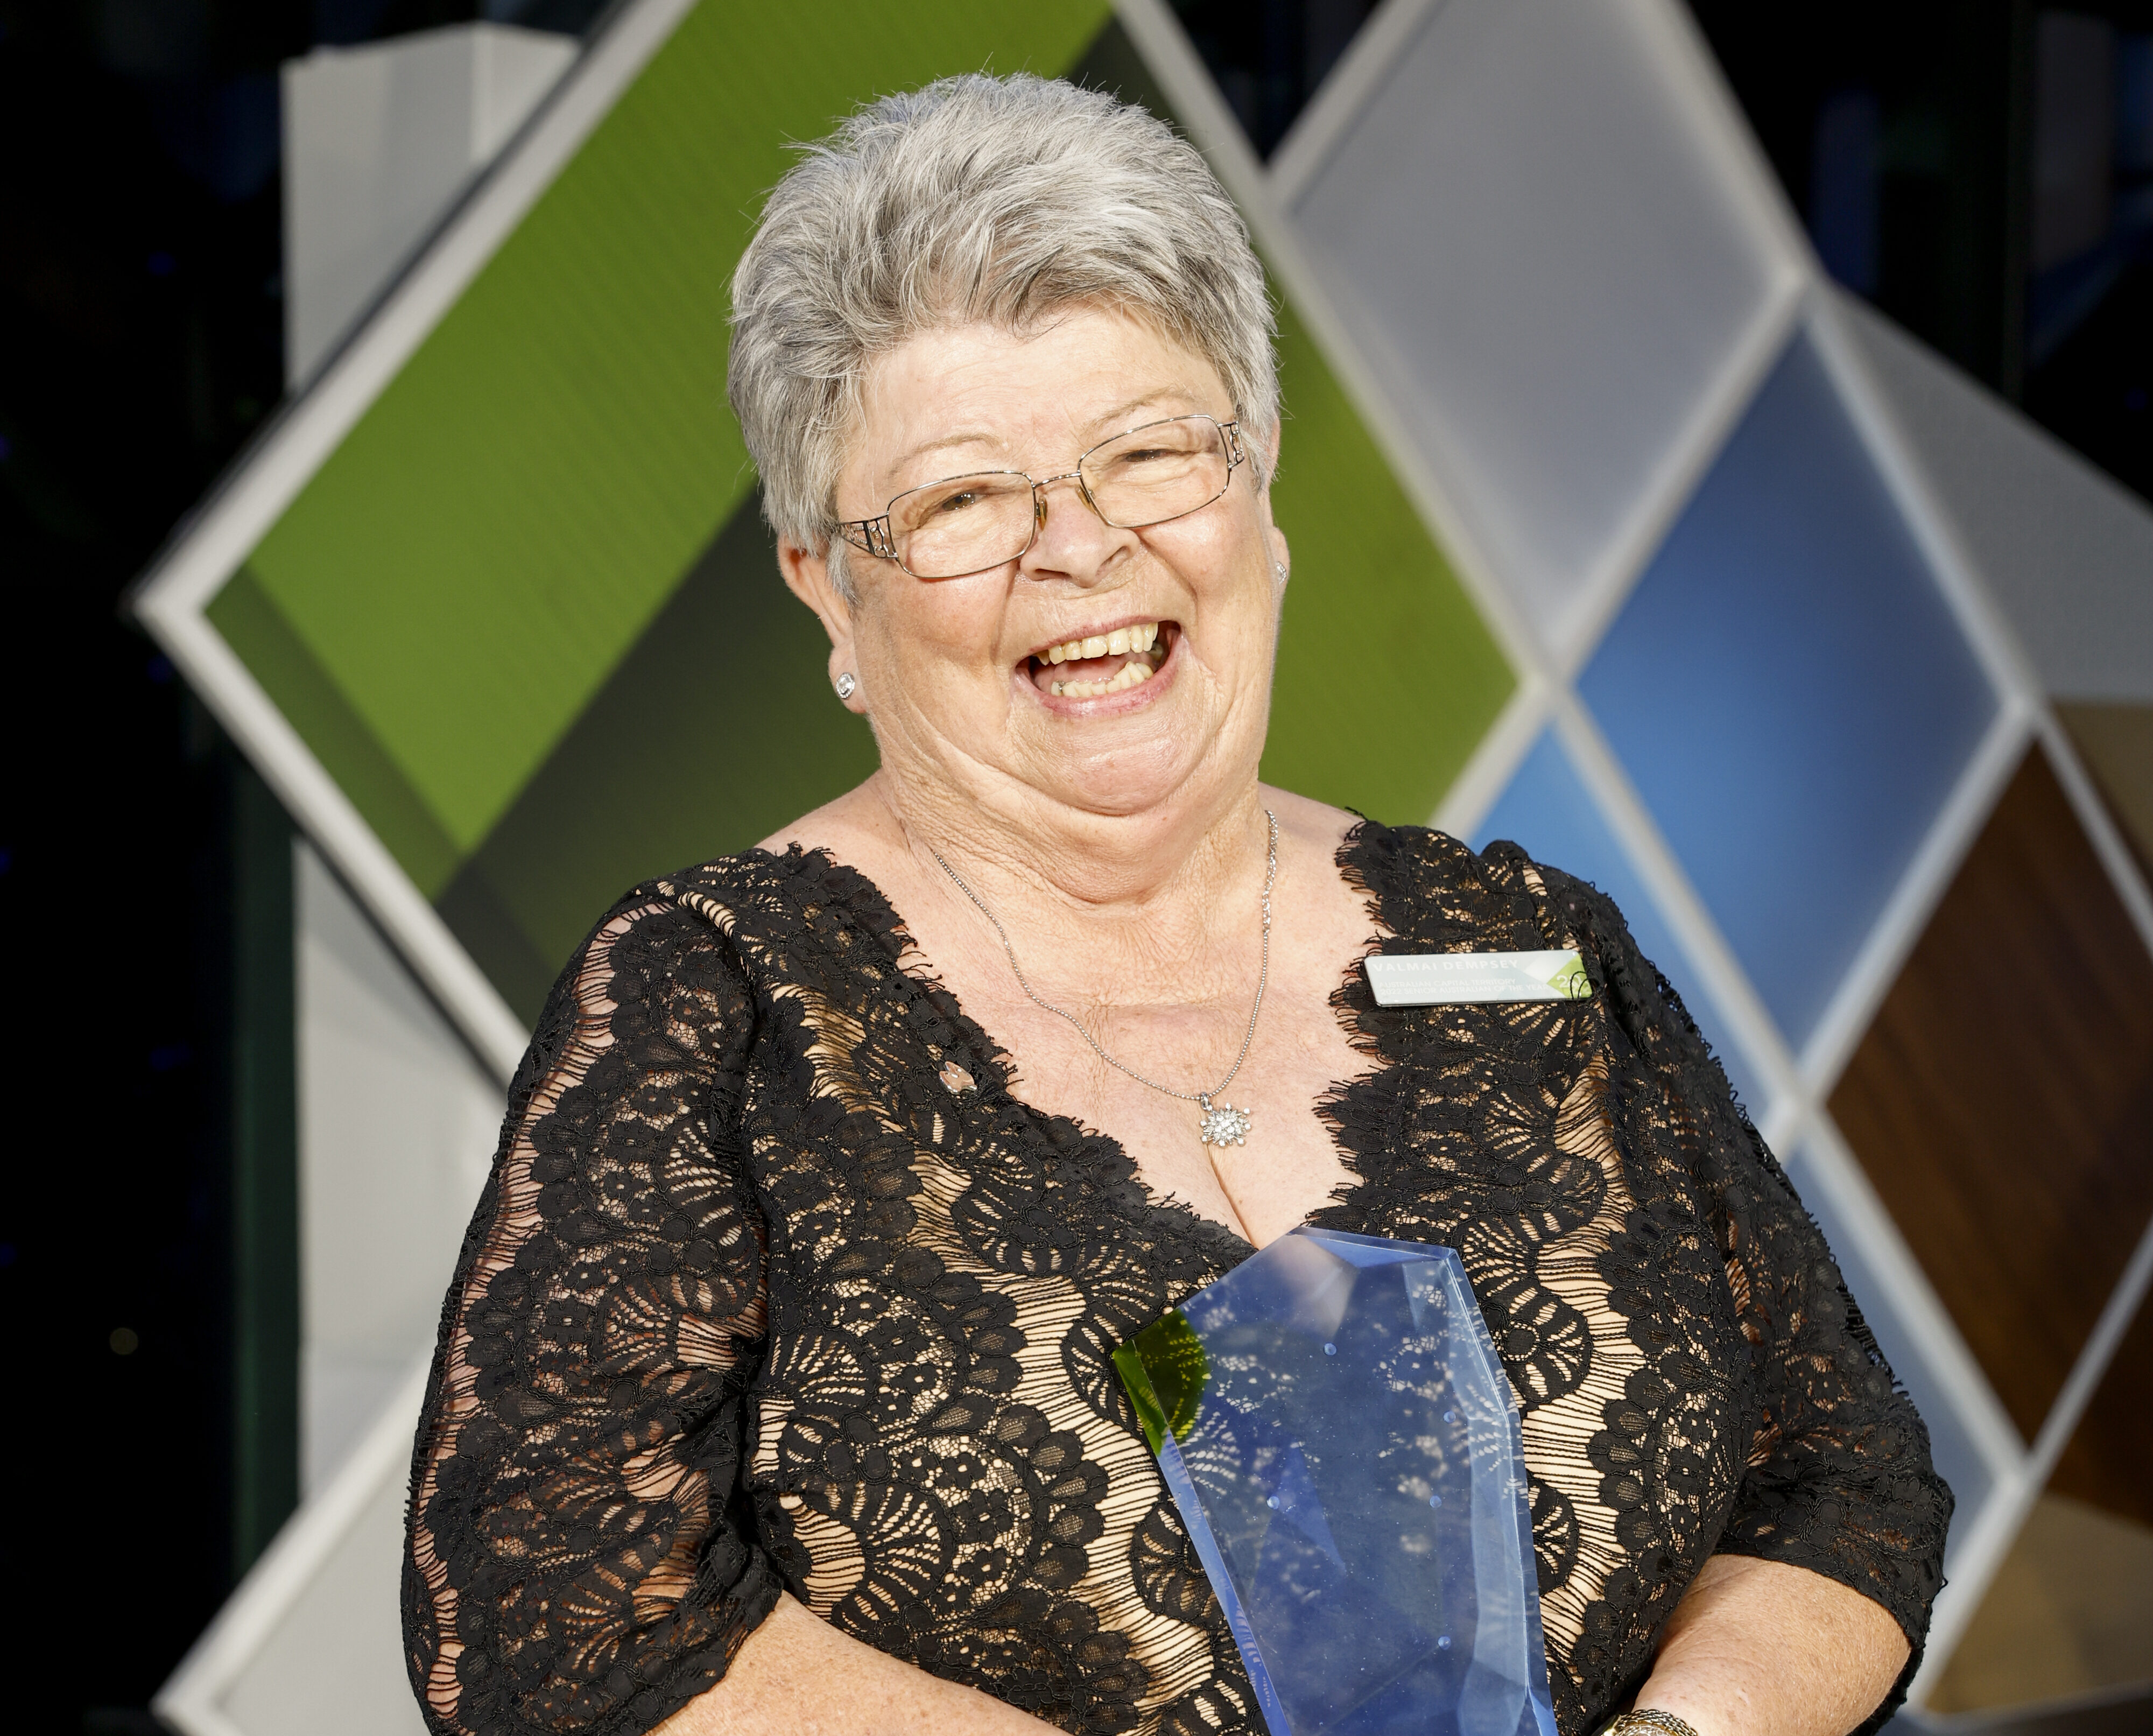 Australian of the Year Awards 2022 - Senior Australian of the Year Val Dempsey from Canberra